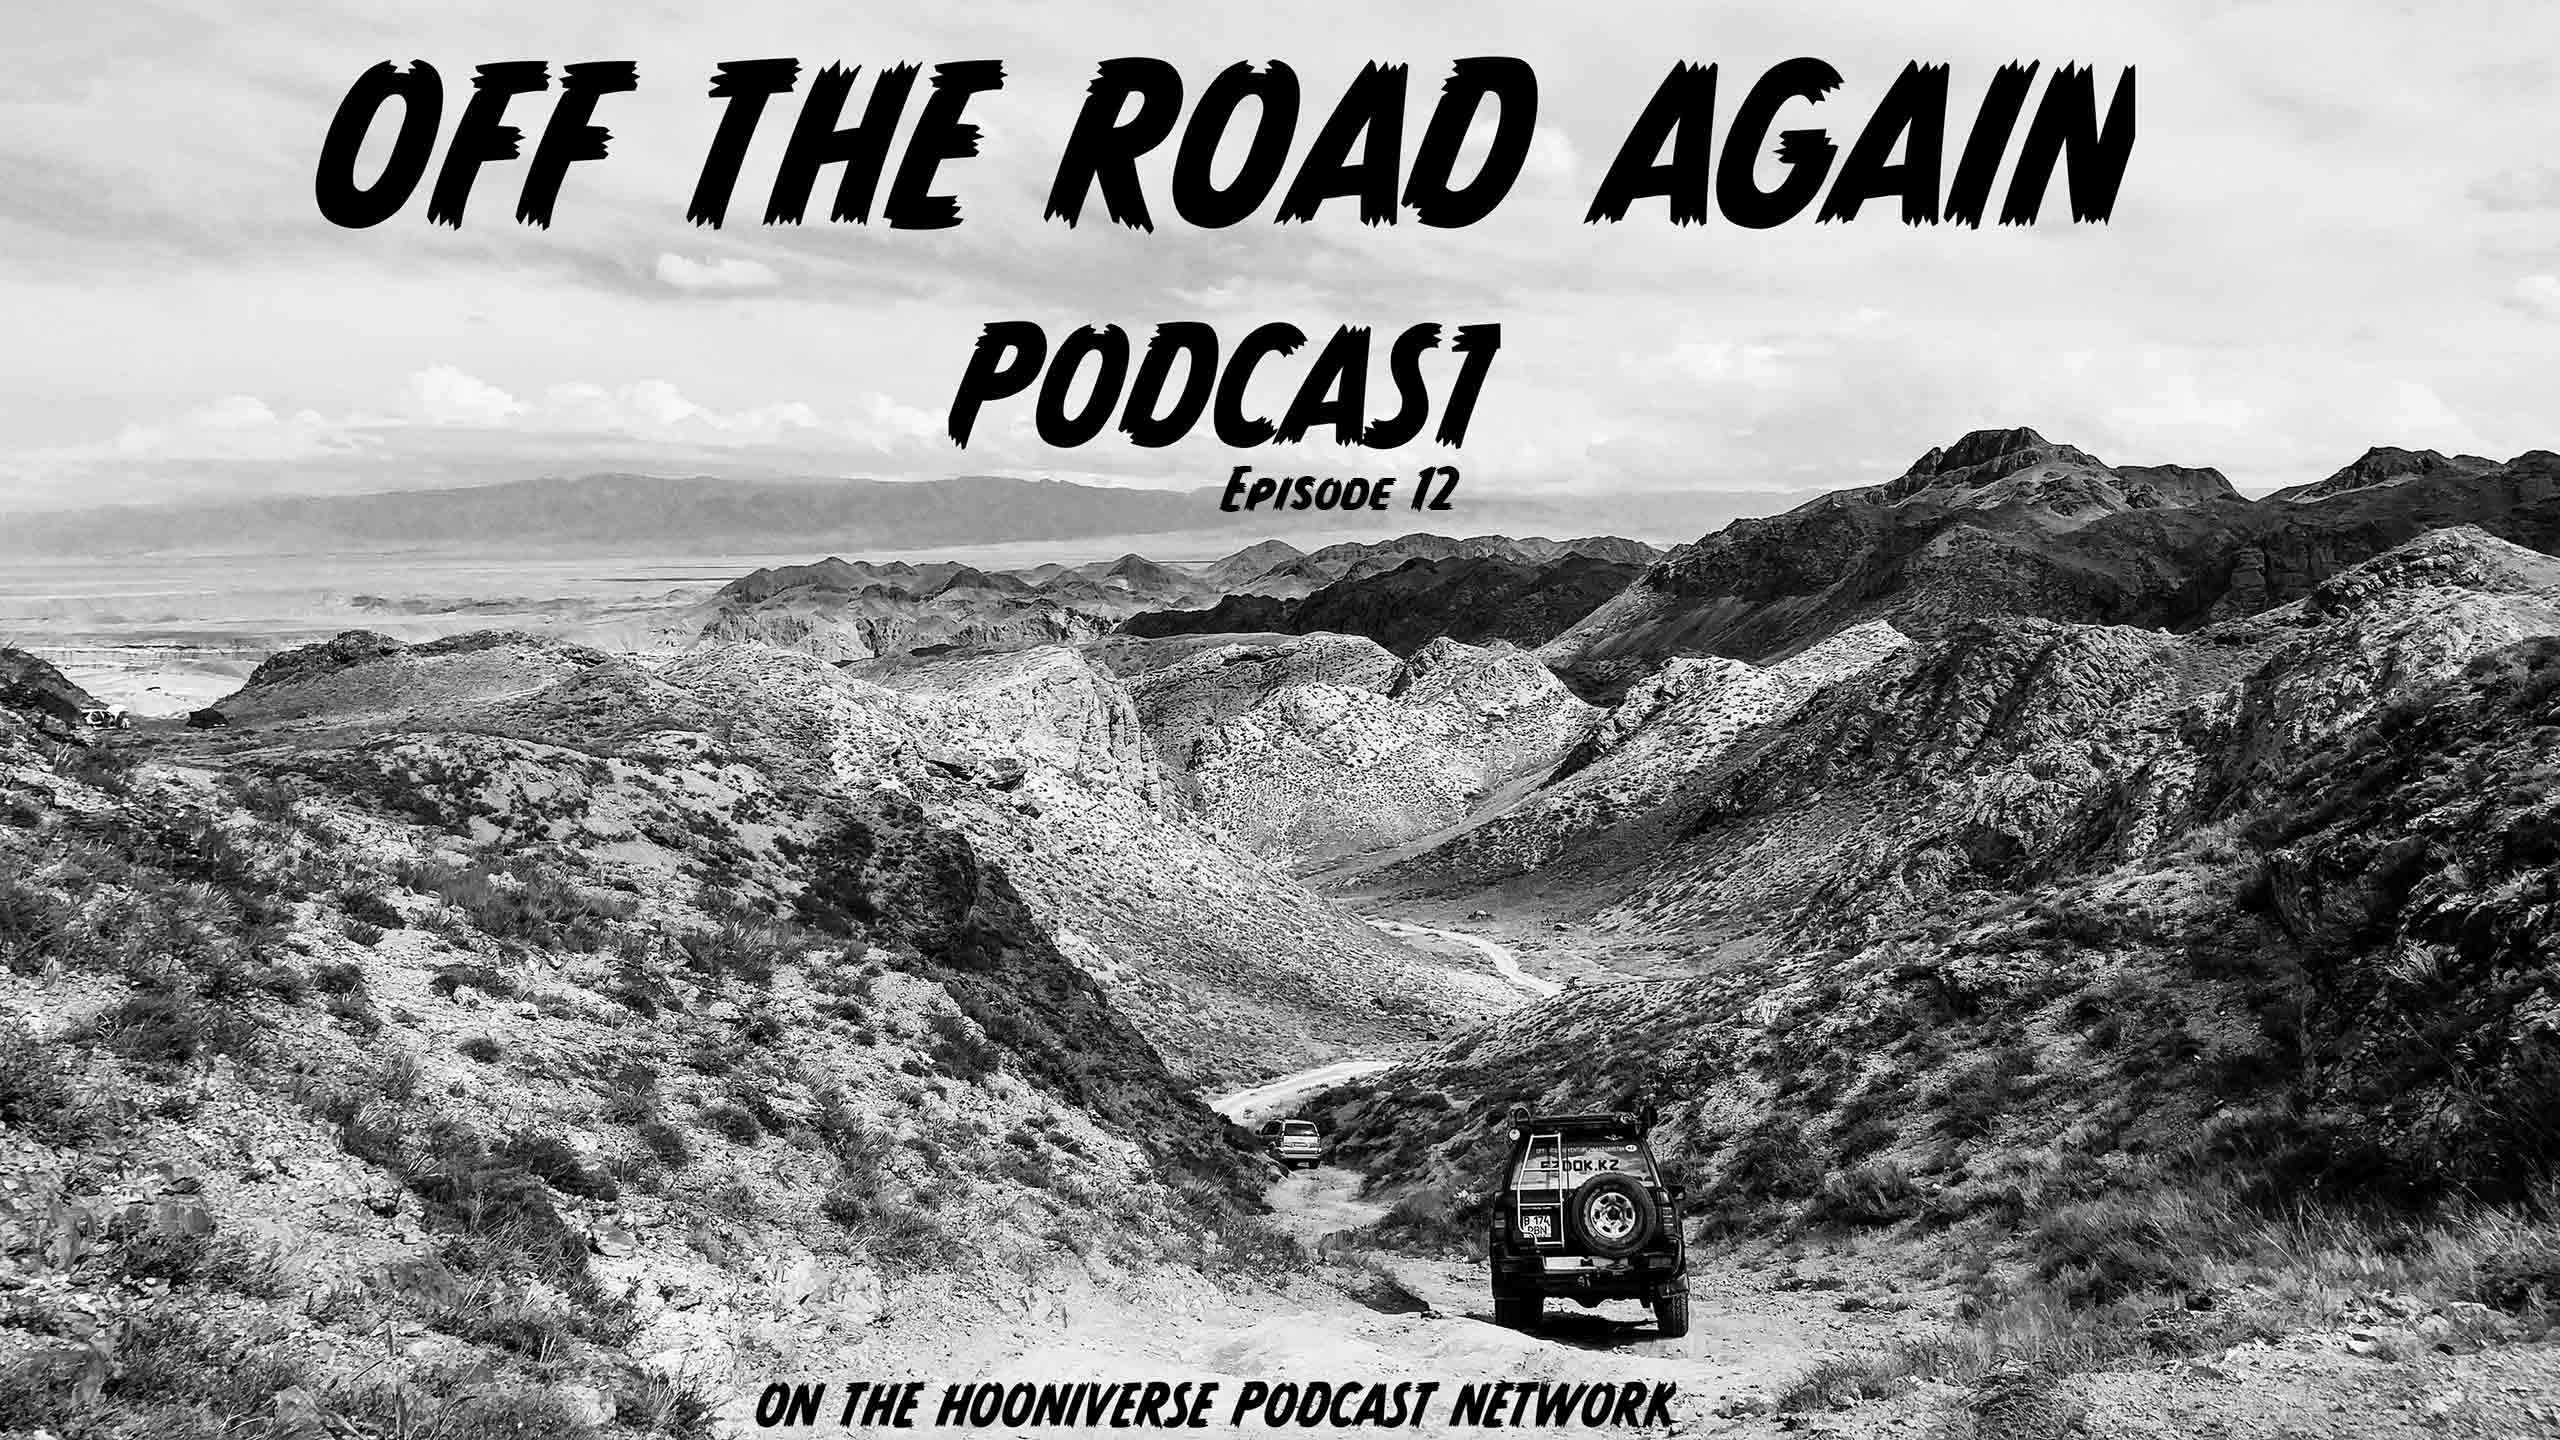 Off The Road Again Podcast - Episode 12